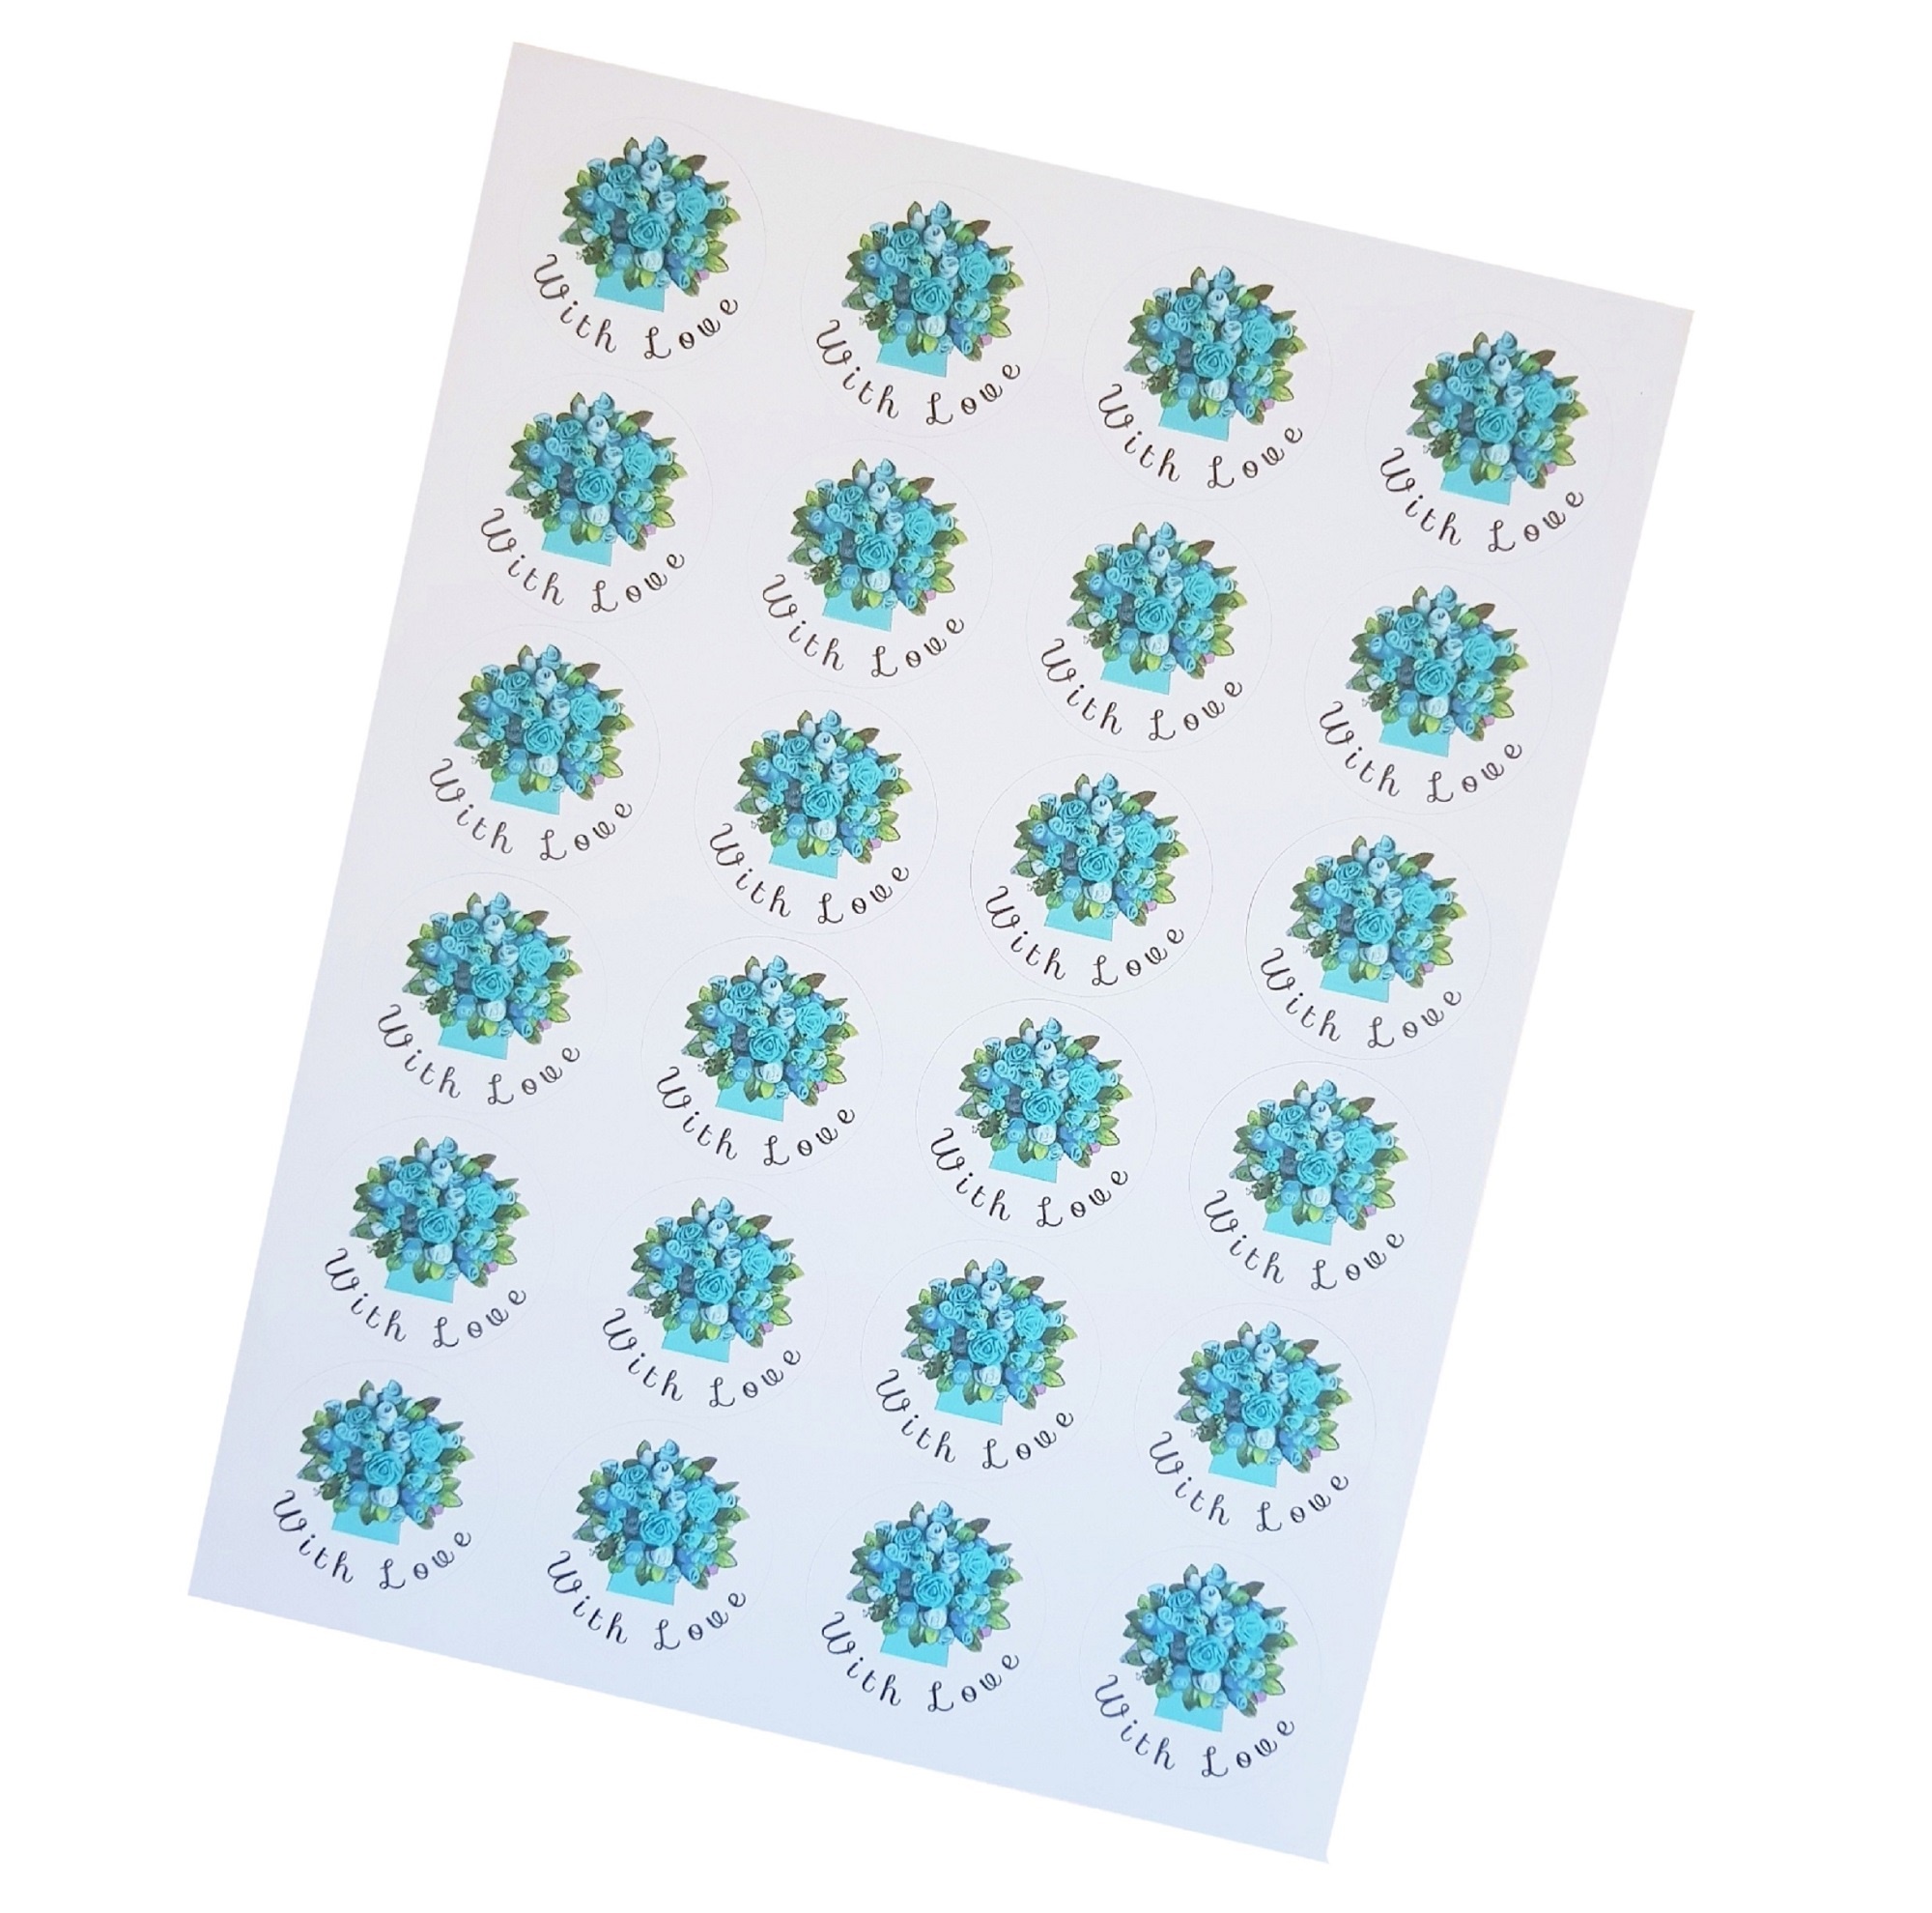 "With Love" Stickers - Blue Floral Bouquet